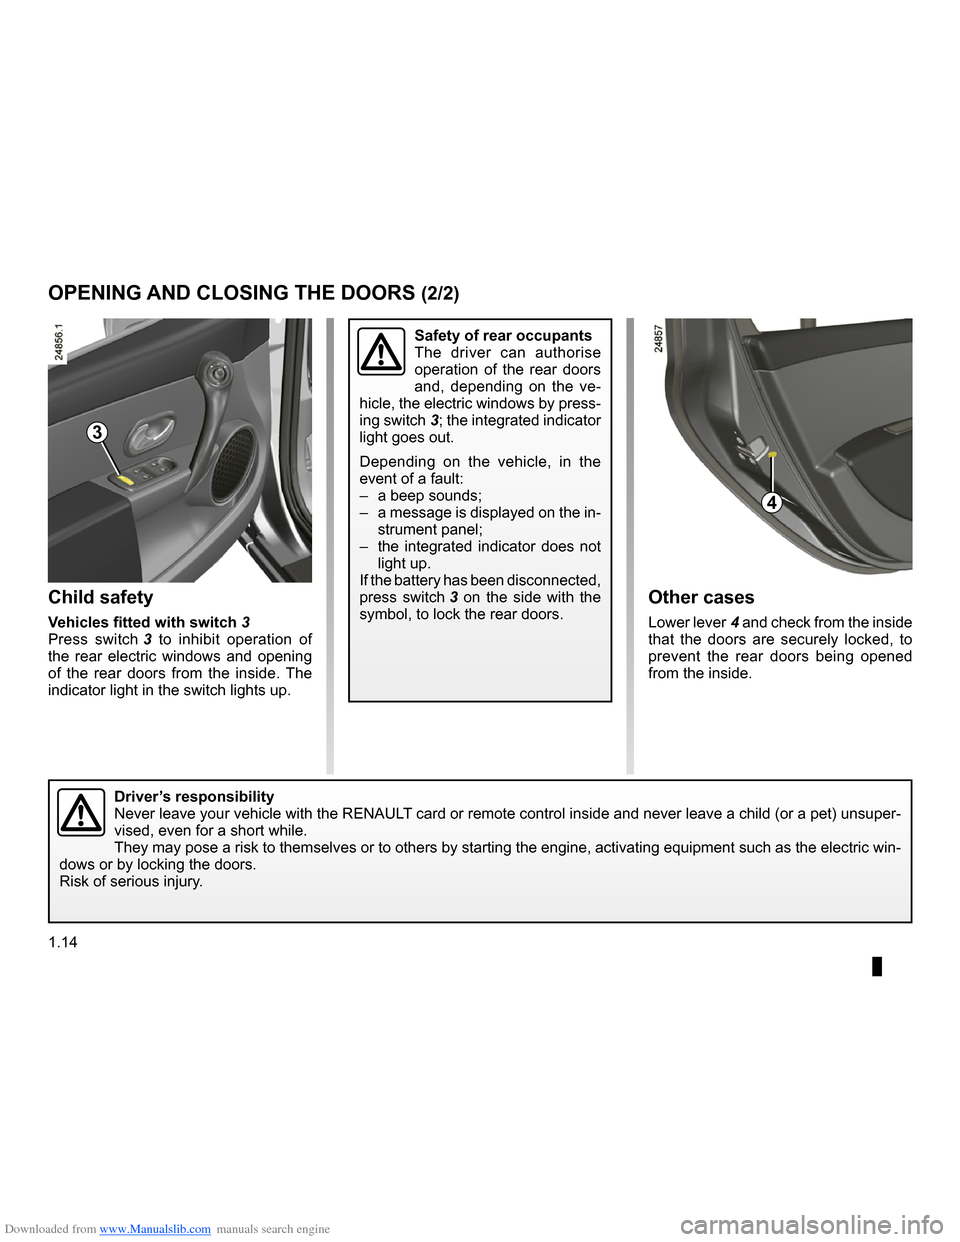 RENAULT CLIO 2009 X85 / 3.G User Guide Downloaded from www.Manualslib.com manuals search engine 
1.14
ENG_UD10515_1Ouverture et fermeture des portes (X85 - B85 - C85 - S85 - K85 - Renaul\t)ENG_NU_853-3_BCSK85_Renault_1
Child safety
Vehicl